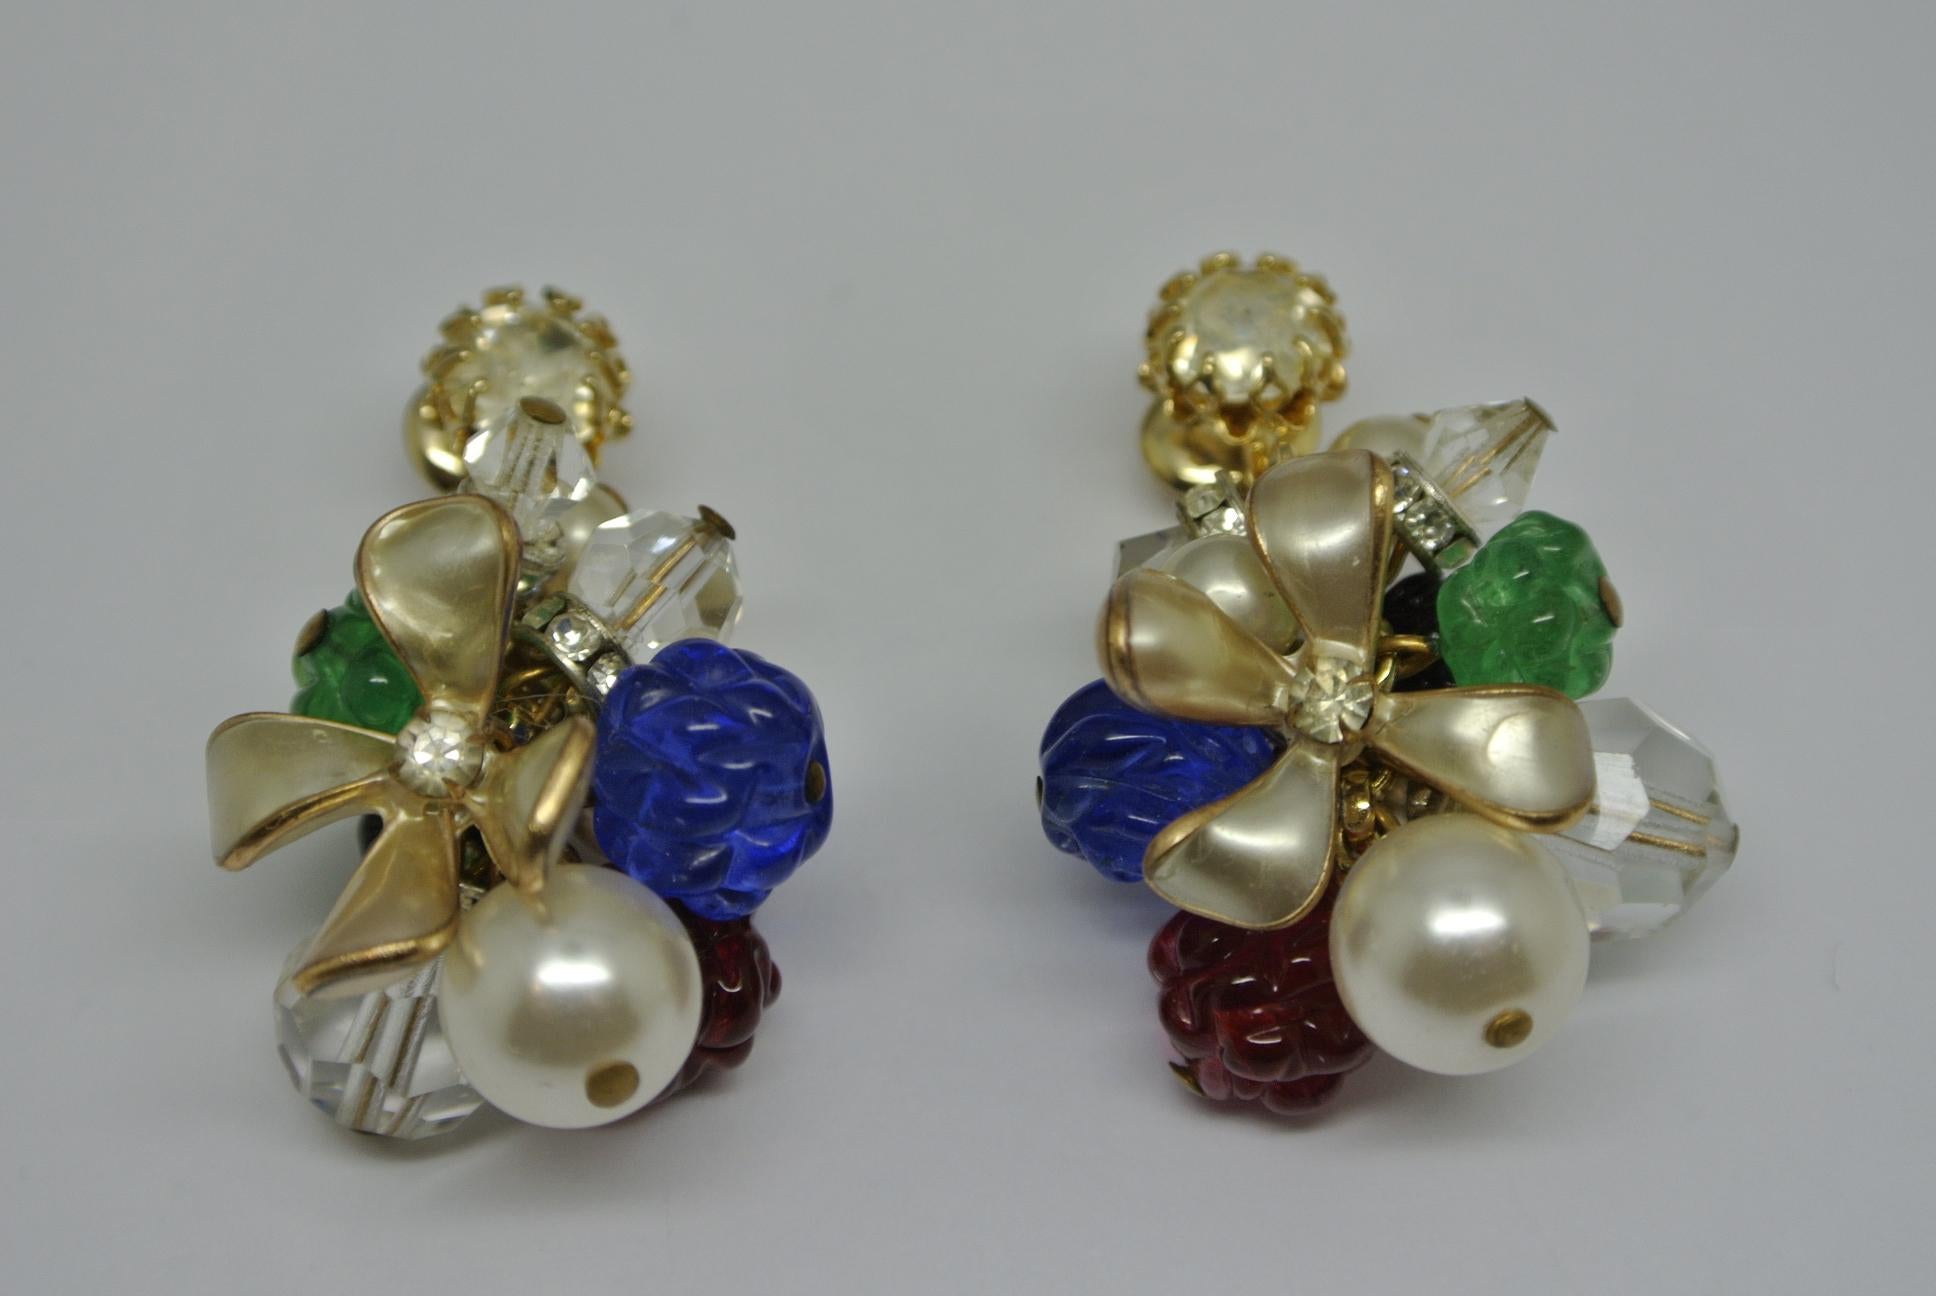 French made earrings, come with white gripoix glass flower and multi-colour berry glasses drops. While earrings top look like replaced ones. 